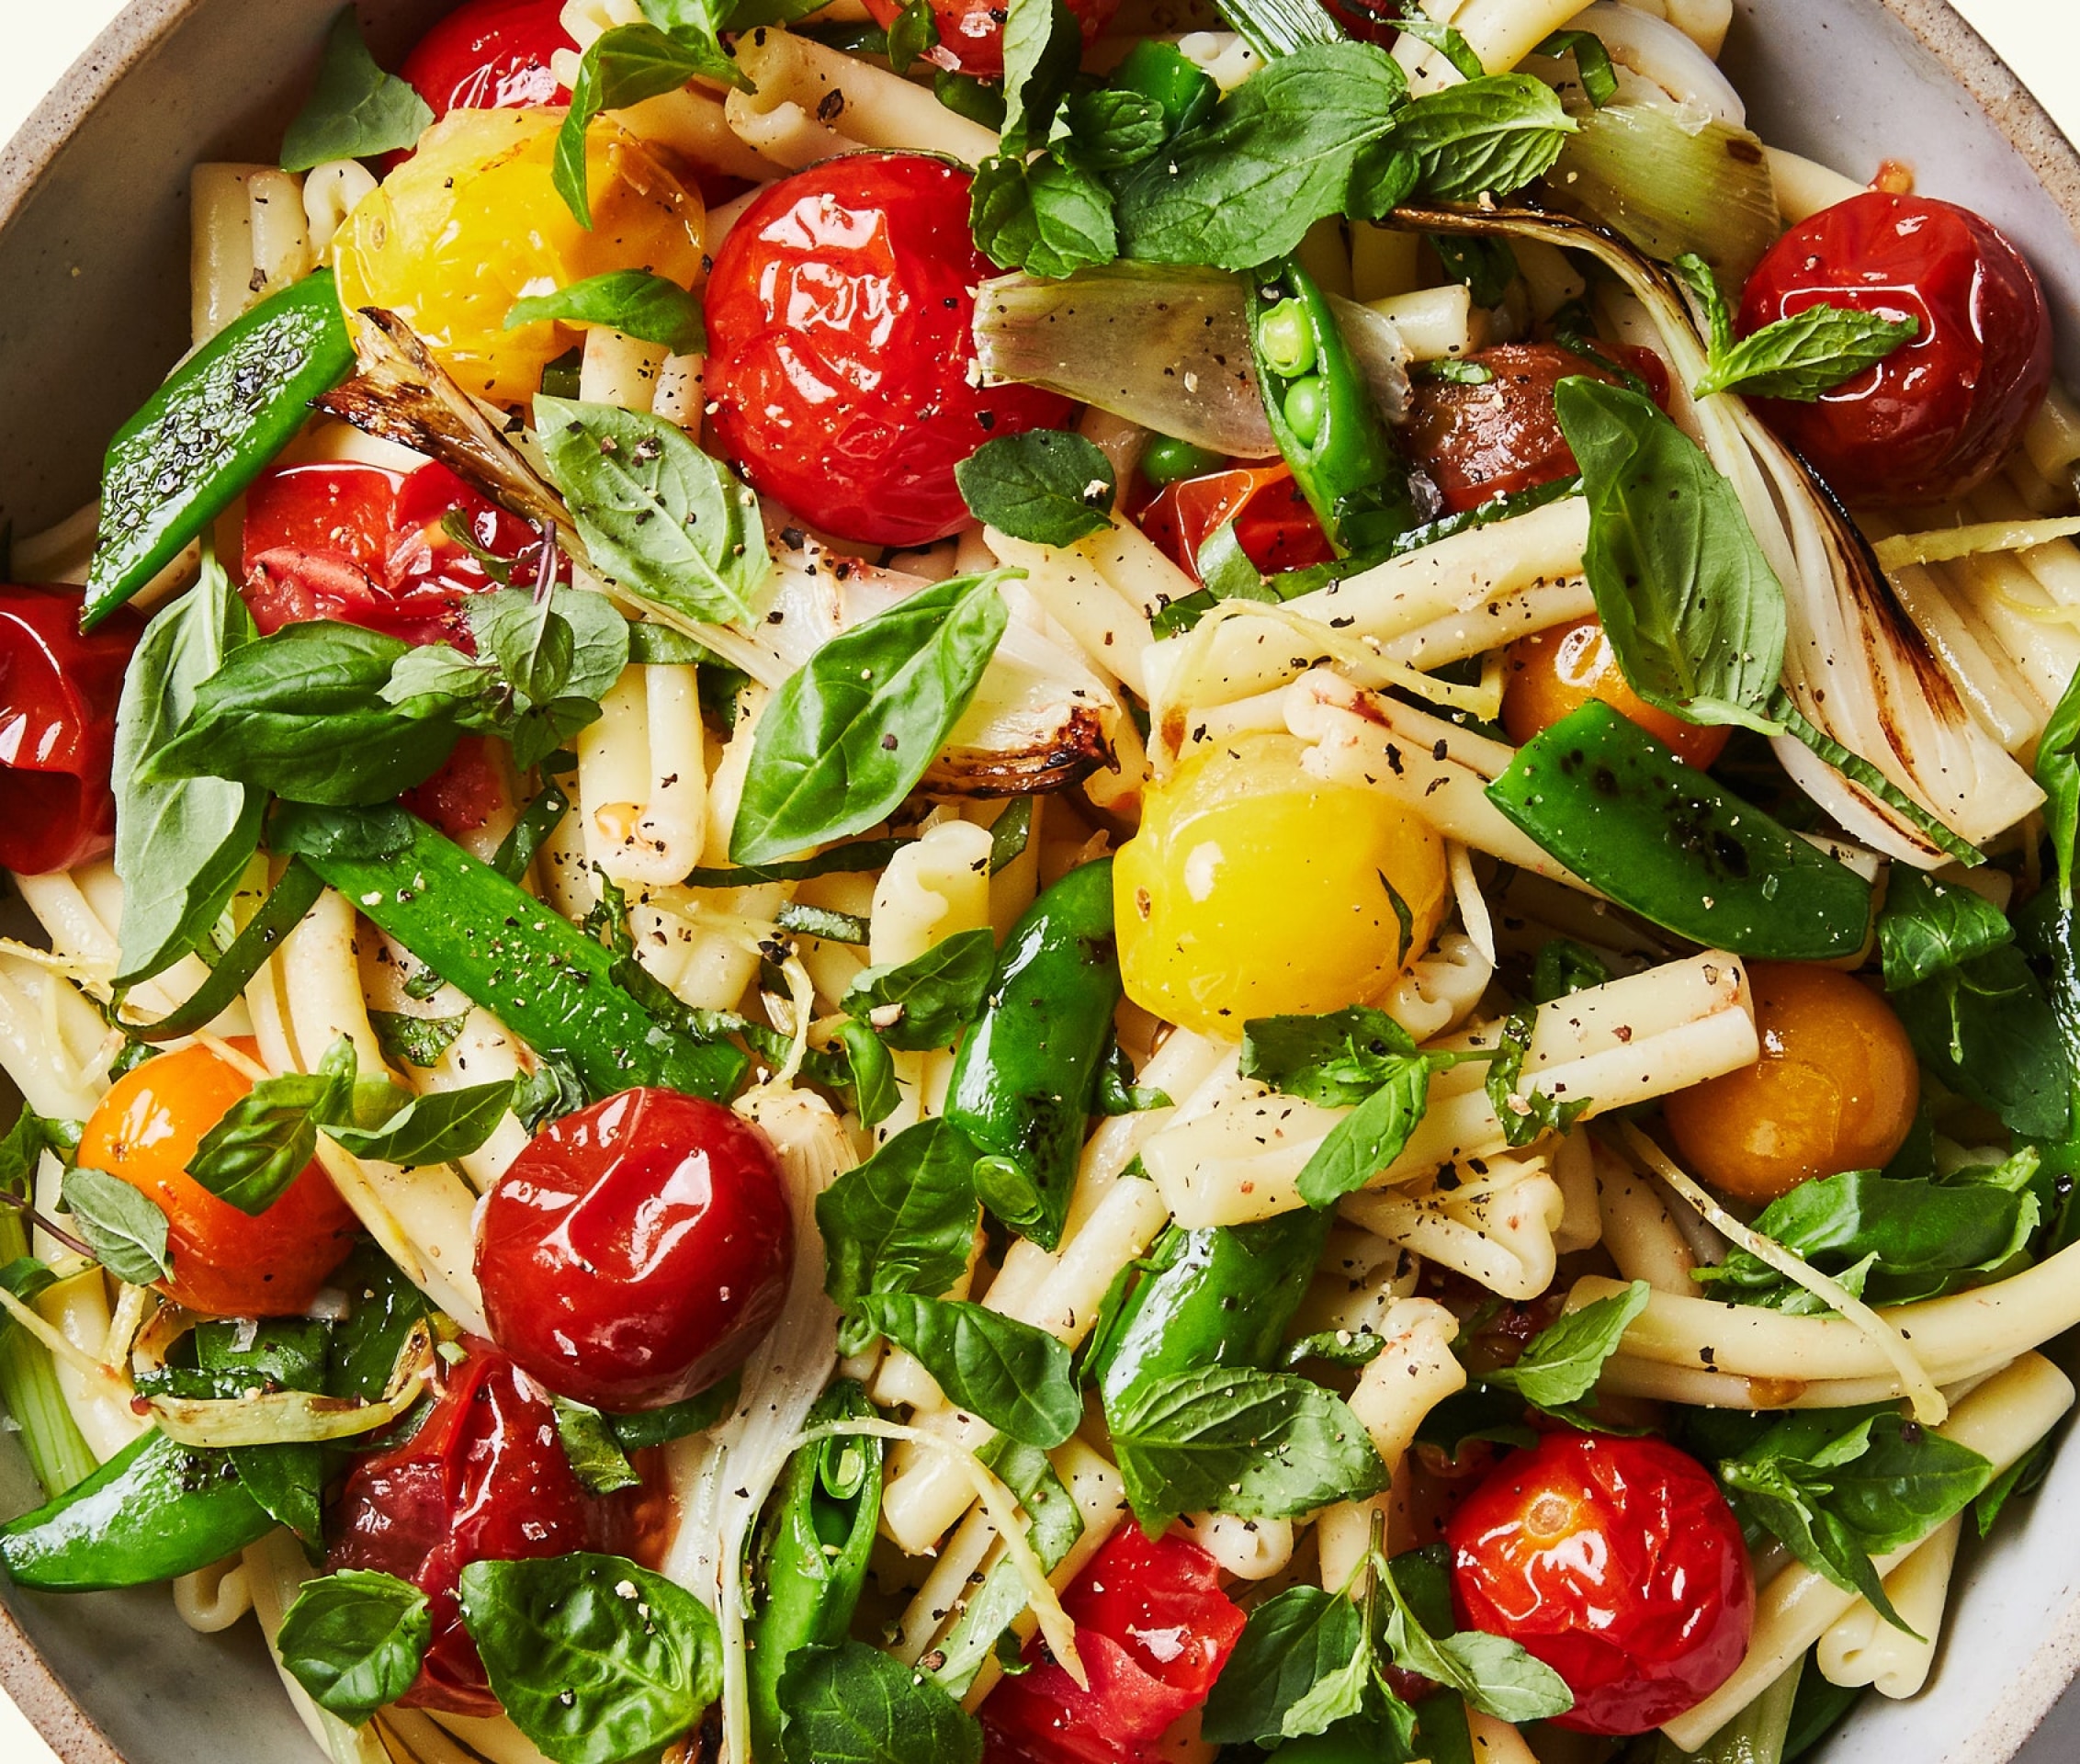 Image of Pasta Salad with Spring Vegetables and Tomatoes